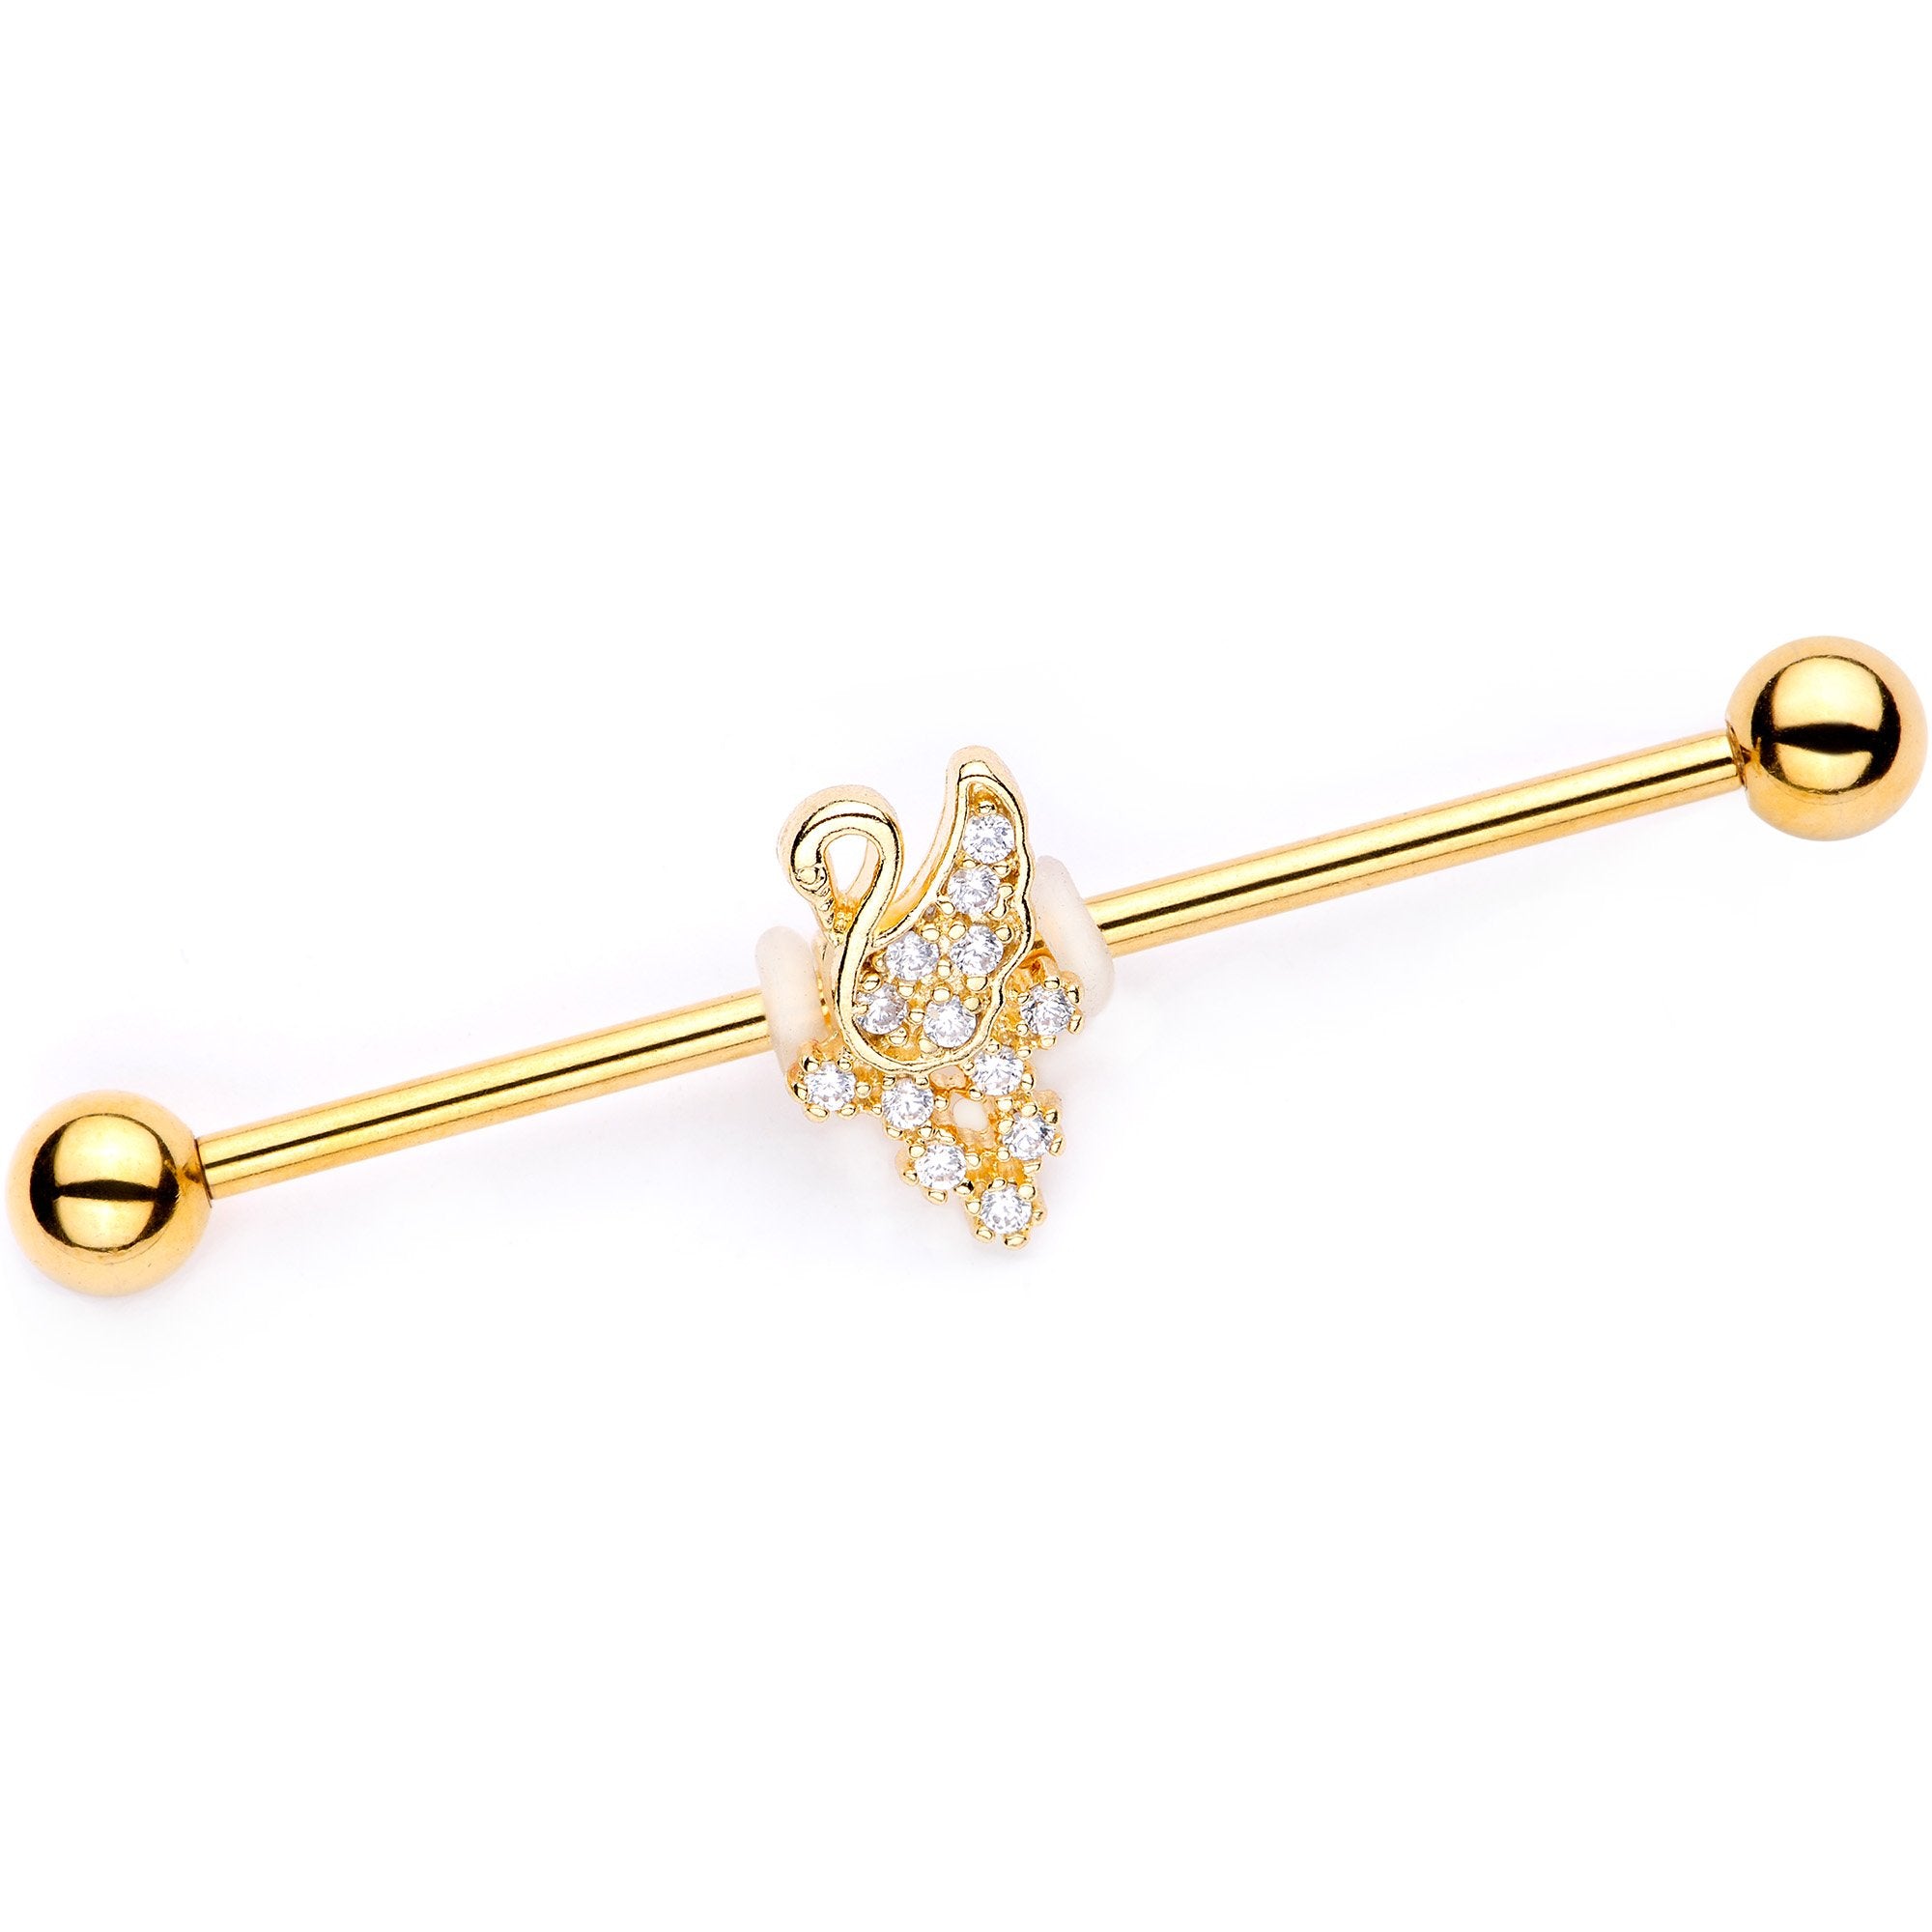 Clear CZ Gem Gold PVD Royal Swan Industrial Barbell 38mm